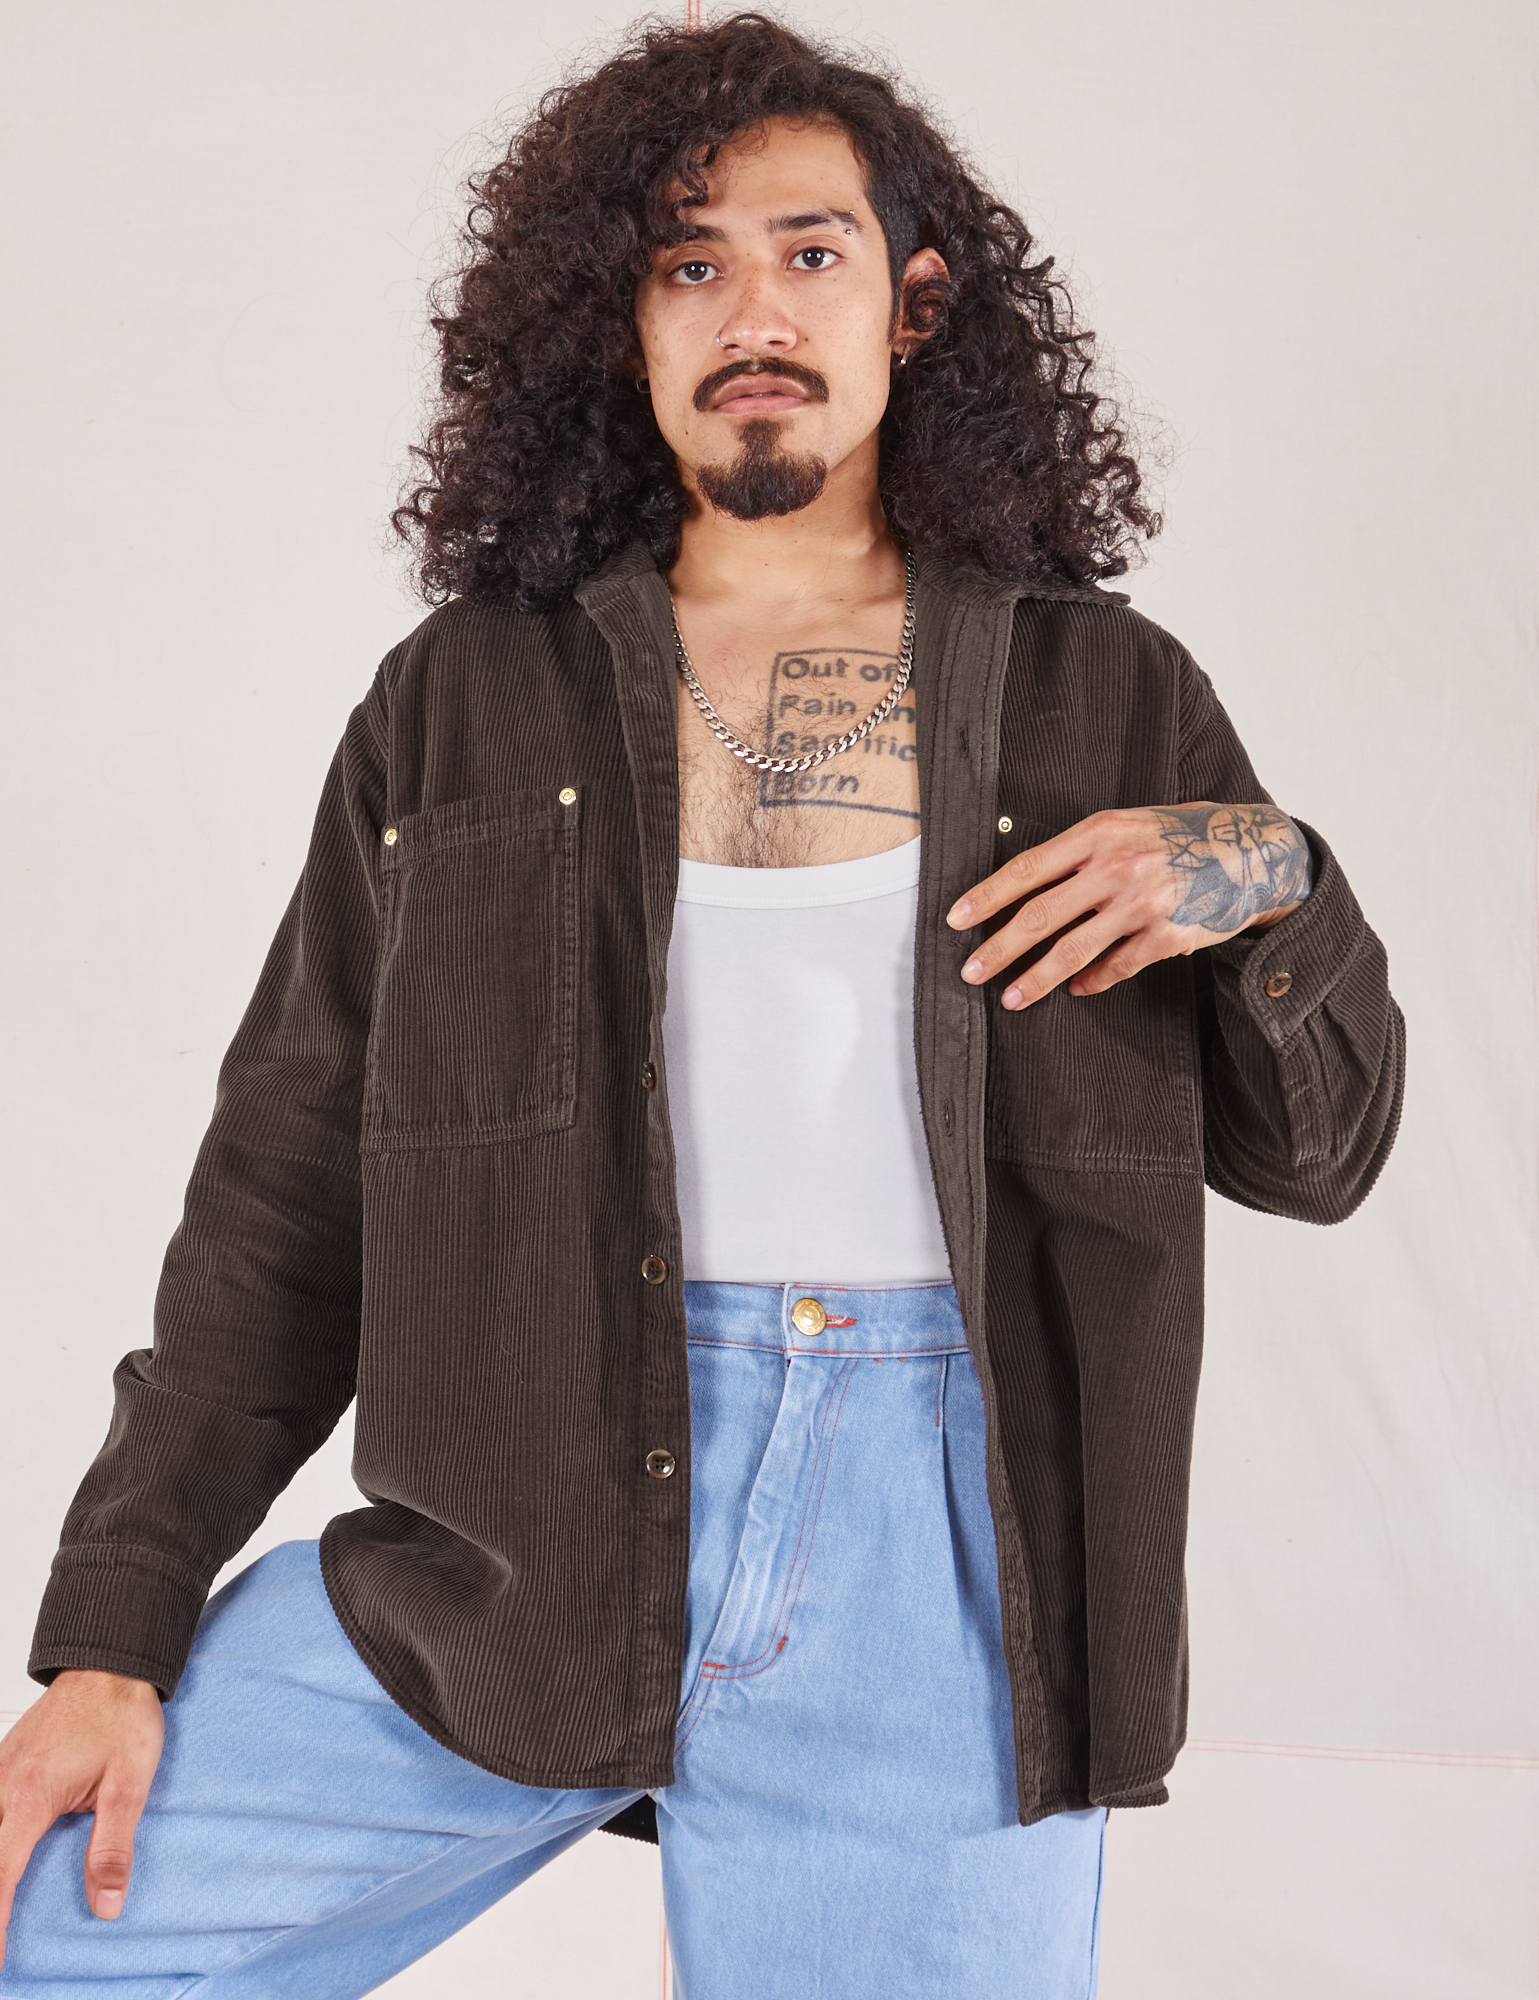 Jesse is 5&#39;8&quot; and wearing XS Corduroy Overshirt in Espresso Brown with a vintage off-white Cropped Tank Top underneath and light wash Denim Trouser Jeans